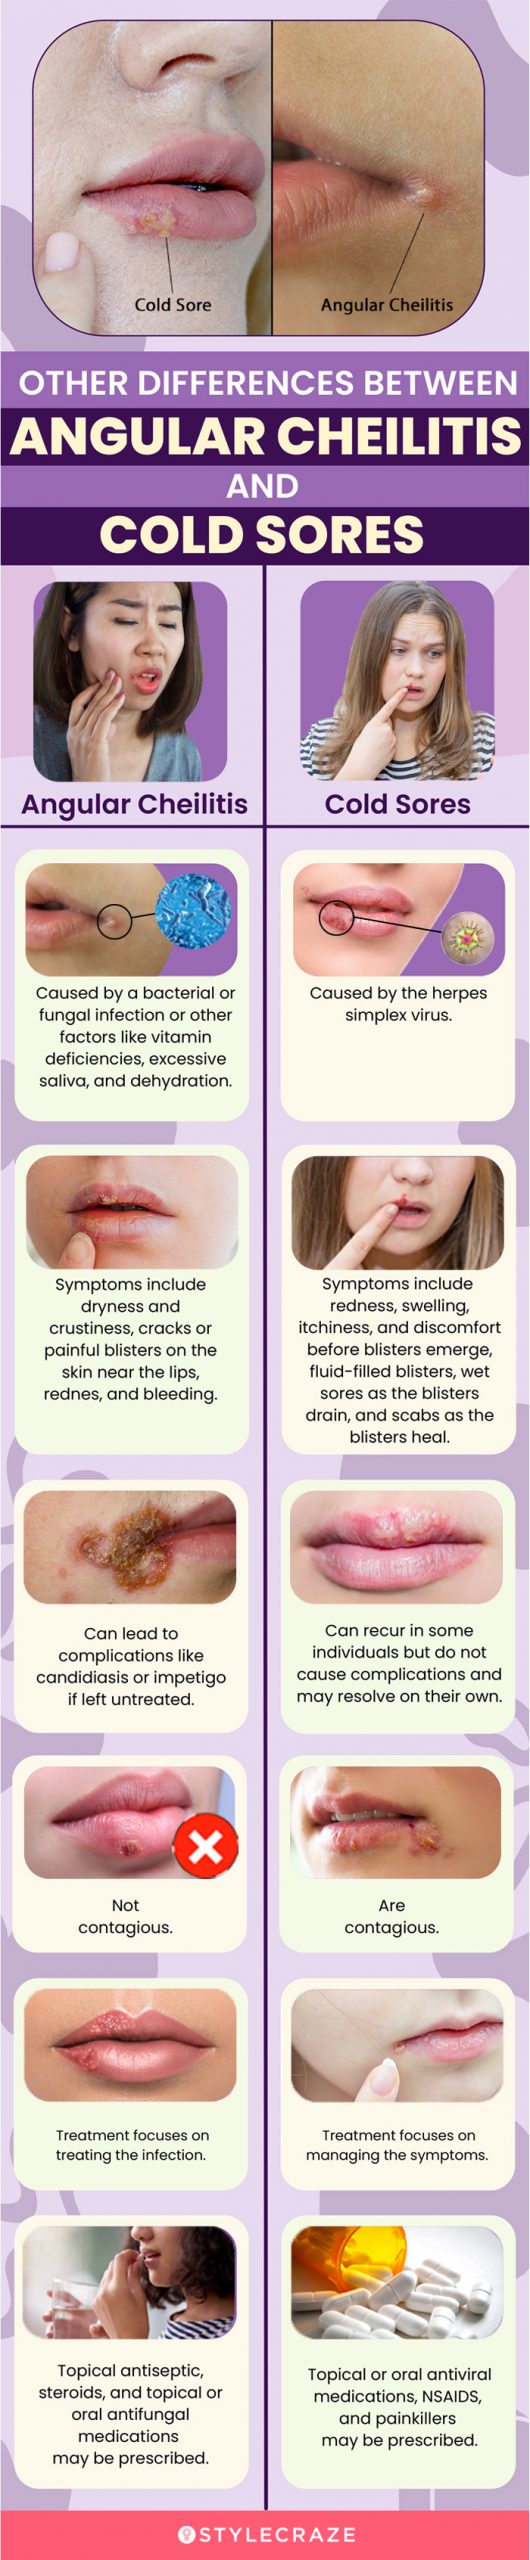 other differences between angular cheilitis and cold sores [infographic]